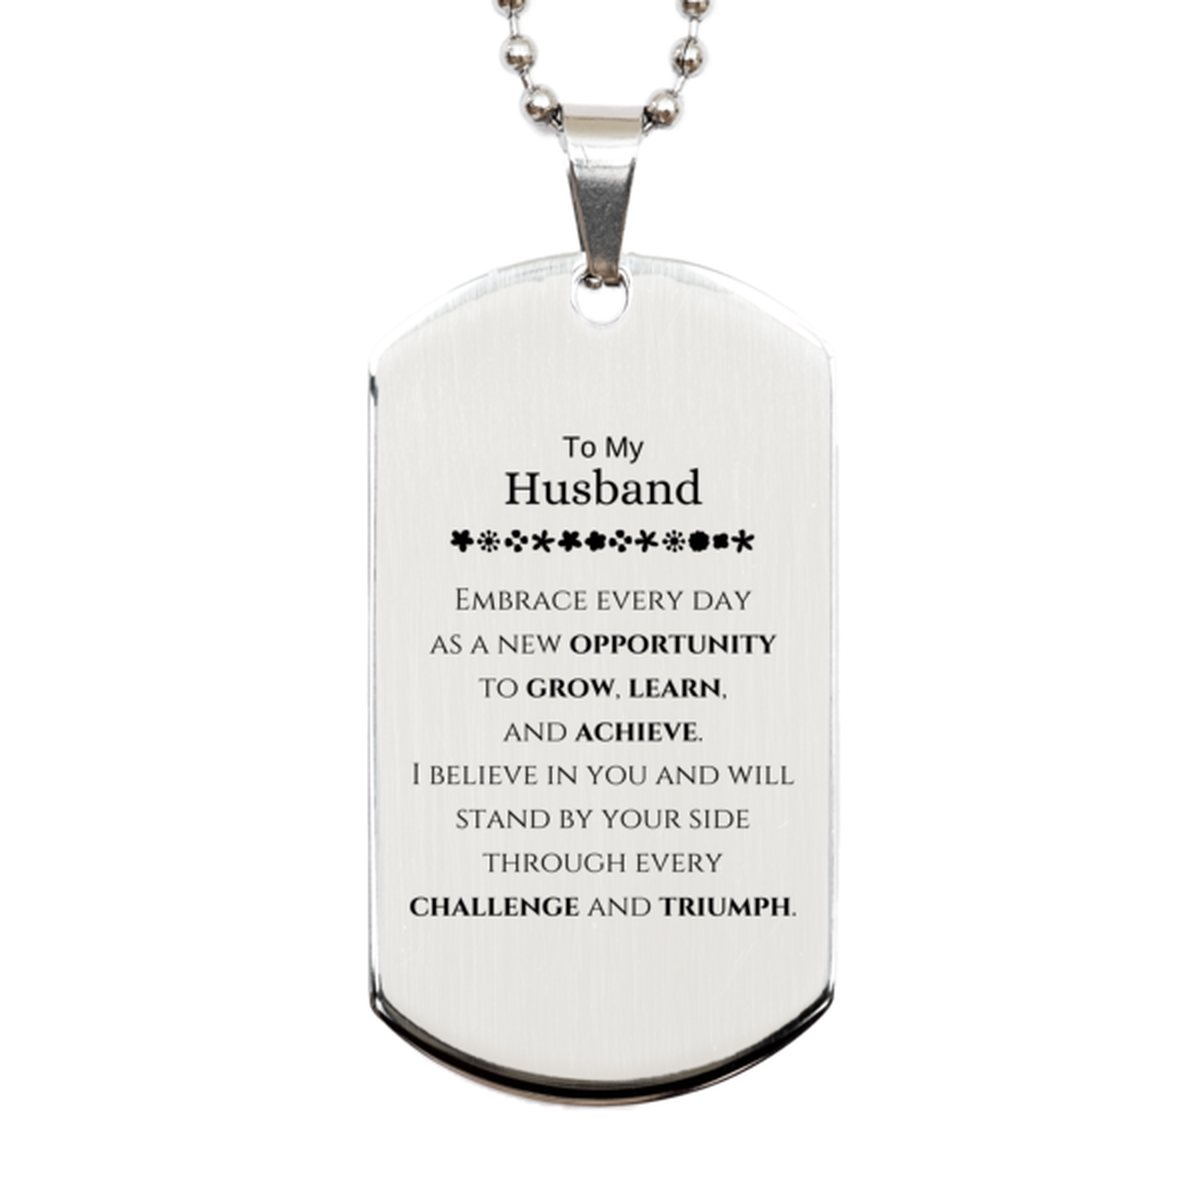 To My Husband Gifts, I believe in you and will stand by your side, Inspirational Silver Dog Tag For Husband, Birthday Christmas Motivational Husband Gifts